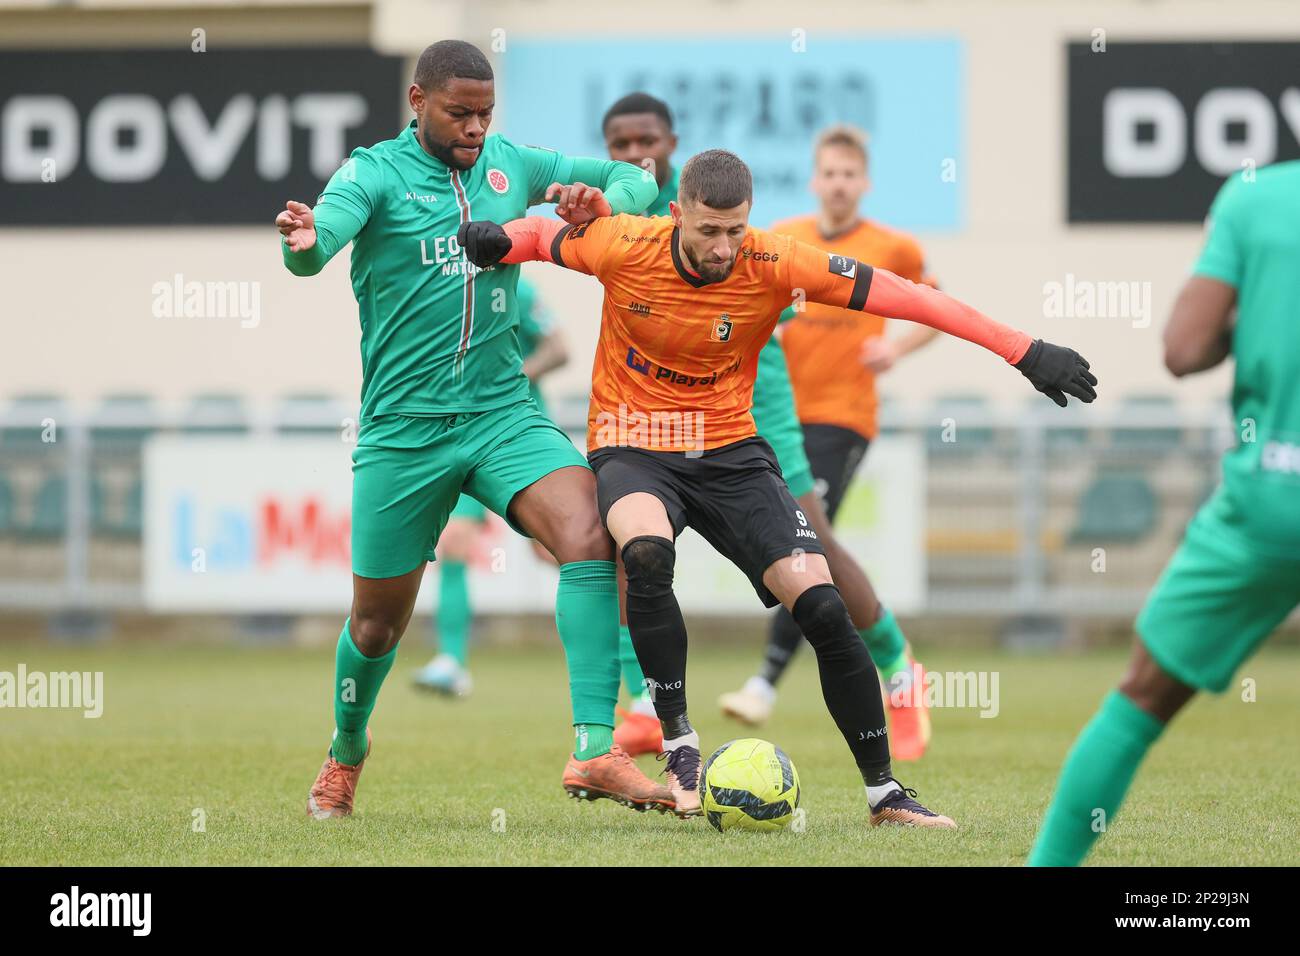 Virton's William Remy and Deinze's Dylan De Belder fight for the ball during a soccer match between RE Virton and KMSK Deinze, Saturday 04 March 2023 in Virton, on day 2 of Relegation Play-offs of the 2022-2023 'Challenger Pro League' 1B second division of the Belgian championship. BELGA PHOTO BRUNO FAHY Stock Photo